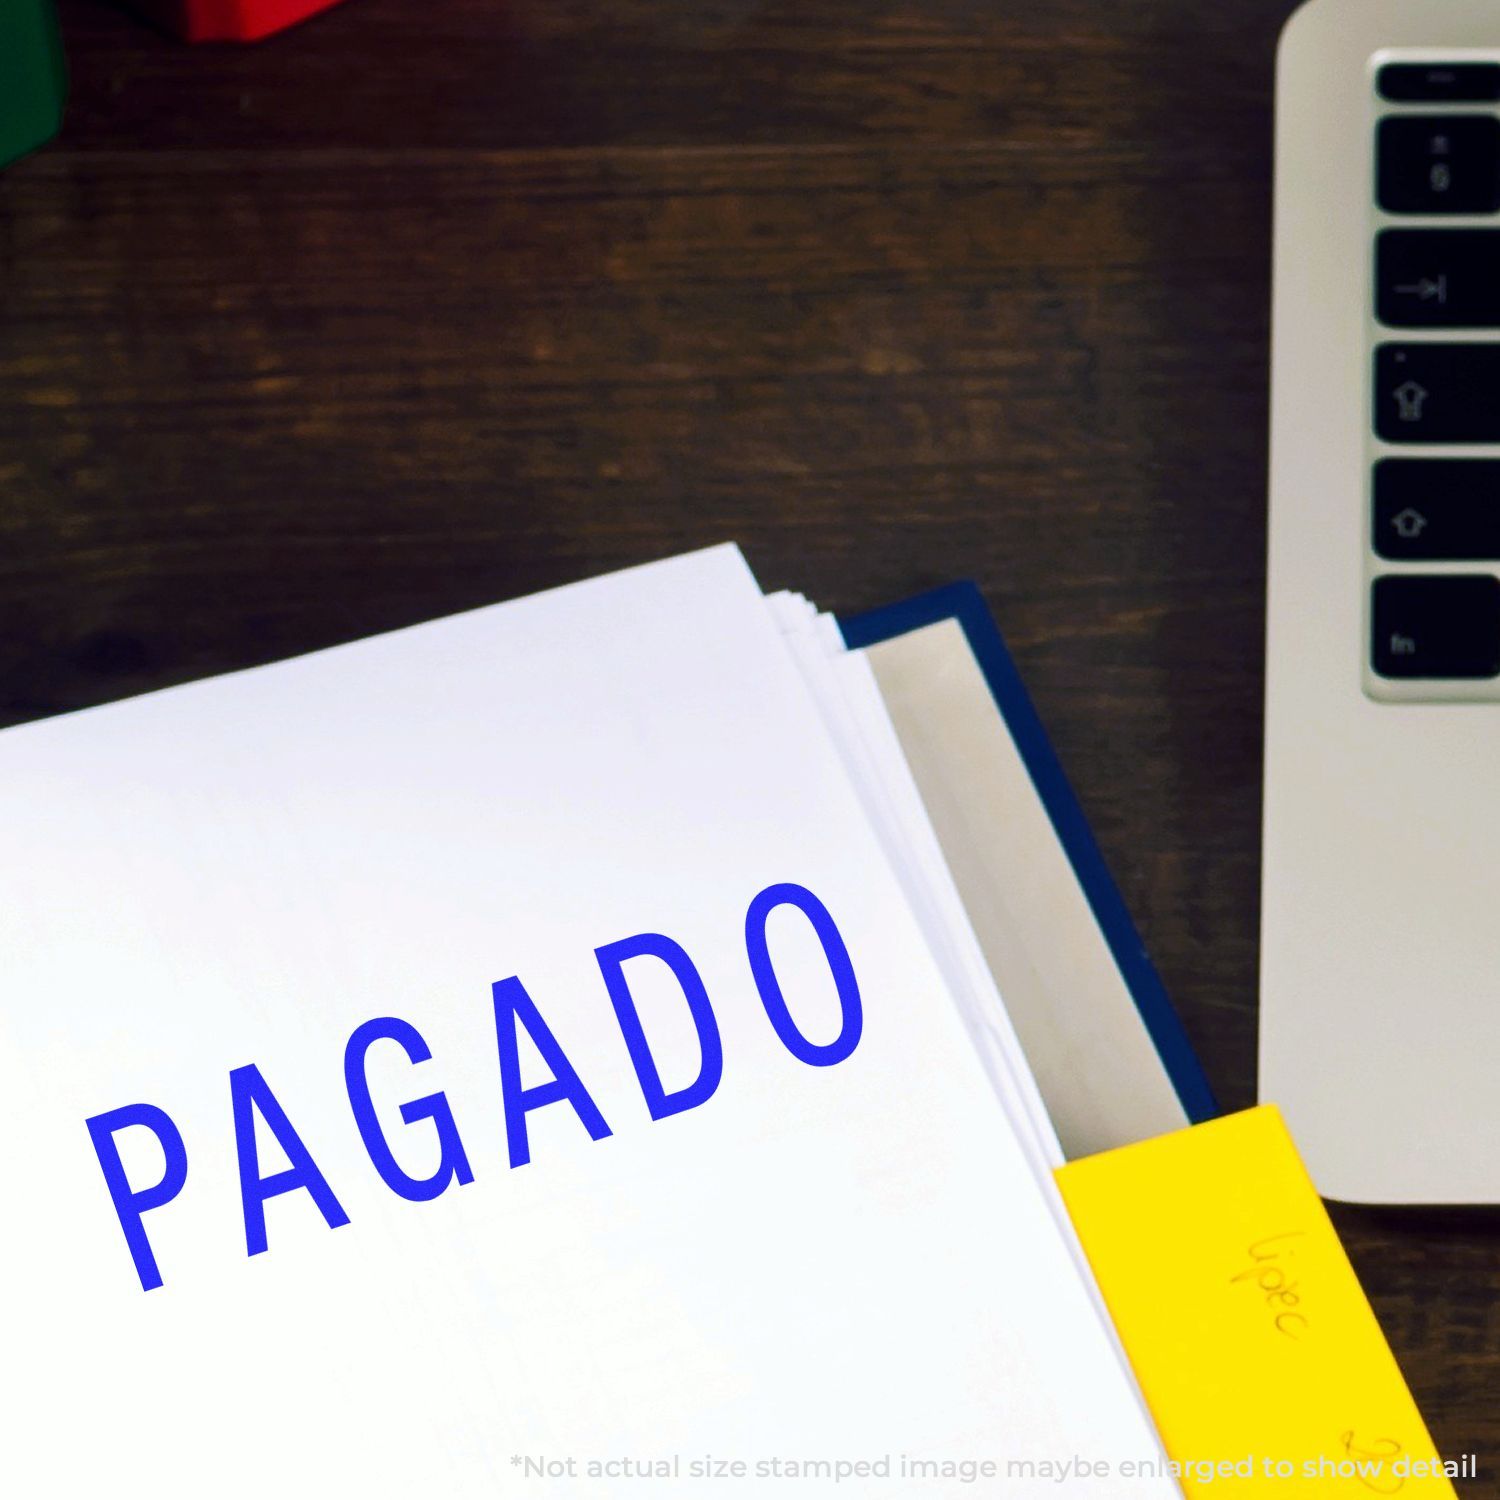 A self-inking stamp with a stamped image showing how the text "PAGADO" is displayed after stamping.